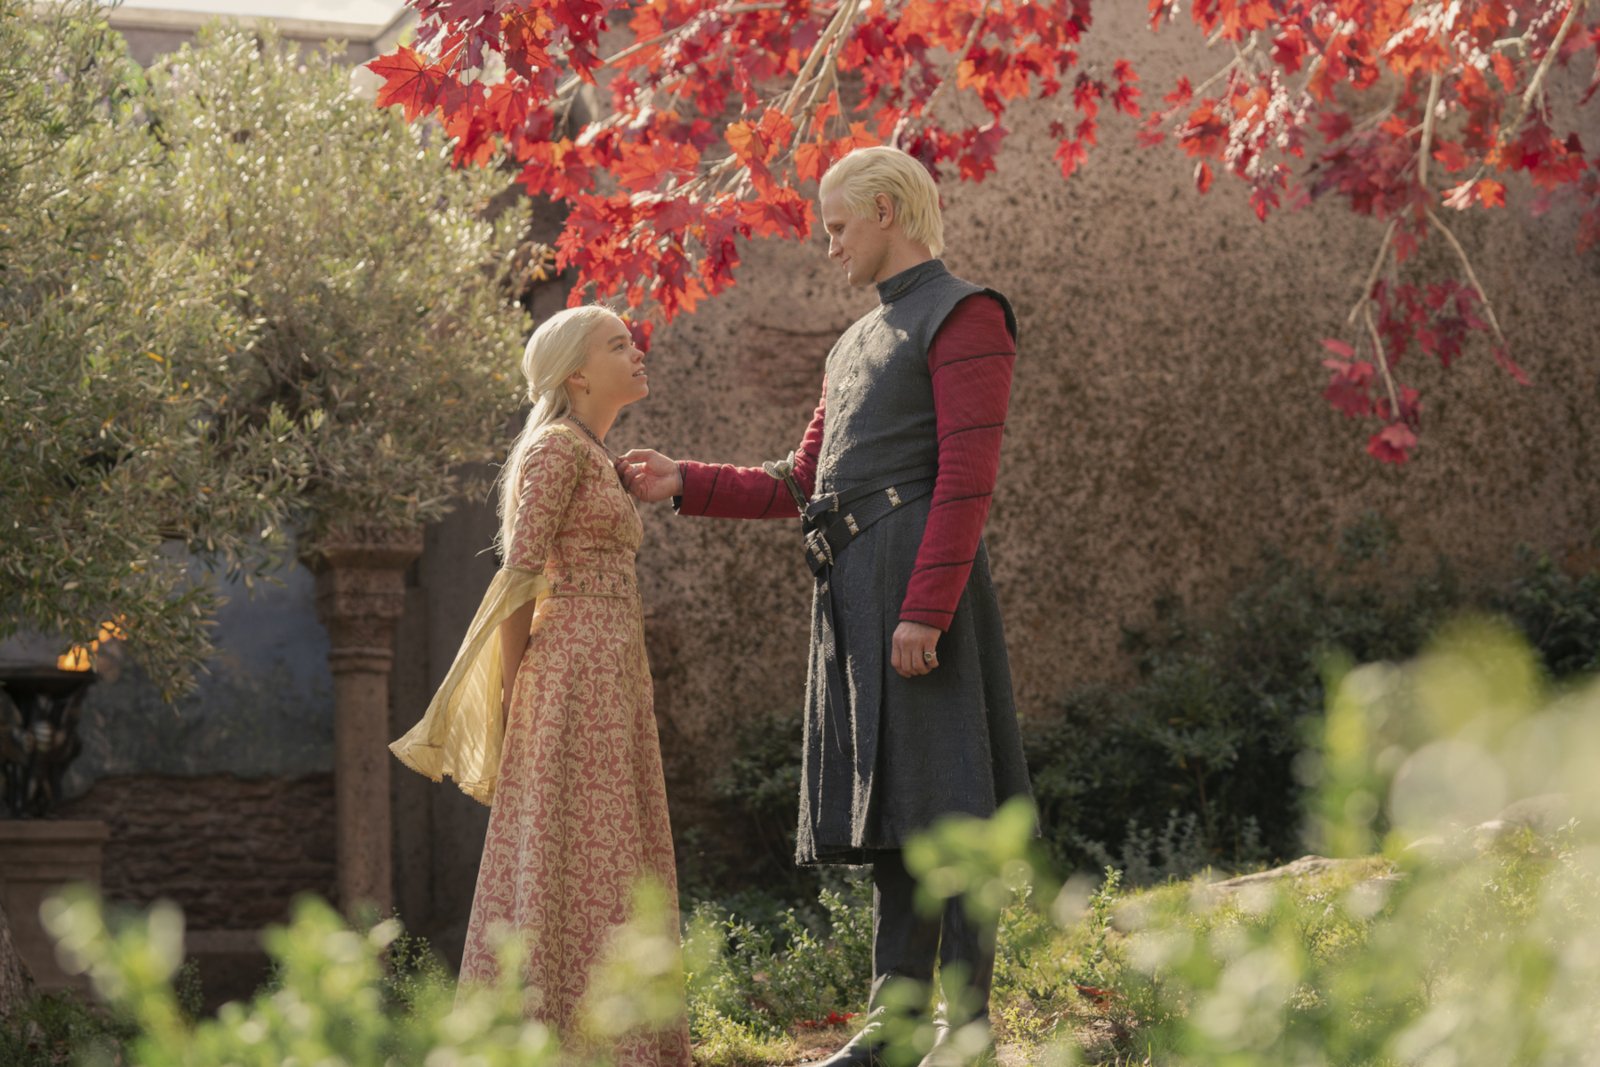 Milly Alcock and Matt Smith as Rhaenyra and Daemon Targaryen in 'House of the Dragon' for our article about episode 5. They're standing beneath a tree with red petals, and Daemon is holding the necklace around Rhaenyra's neck.